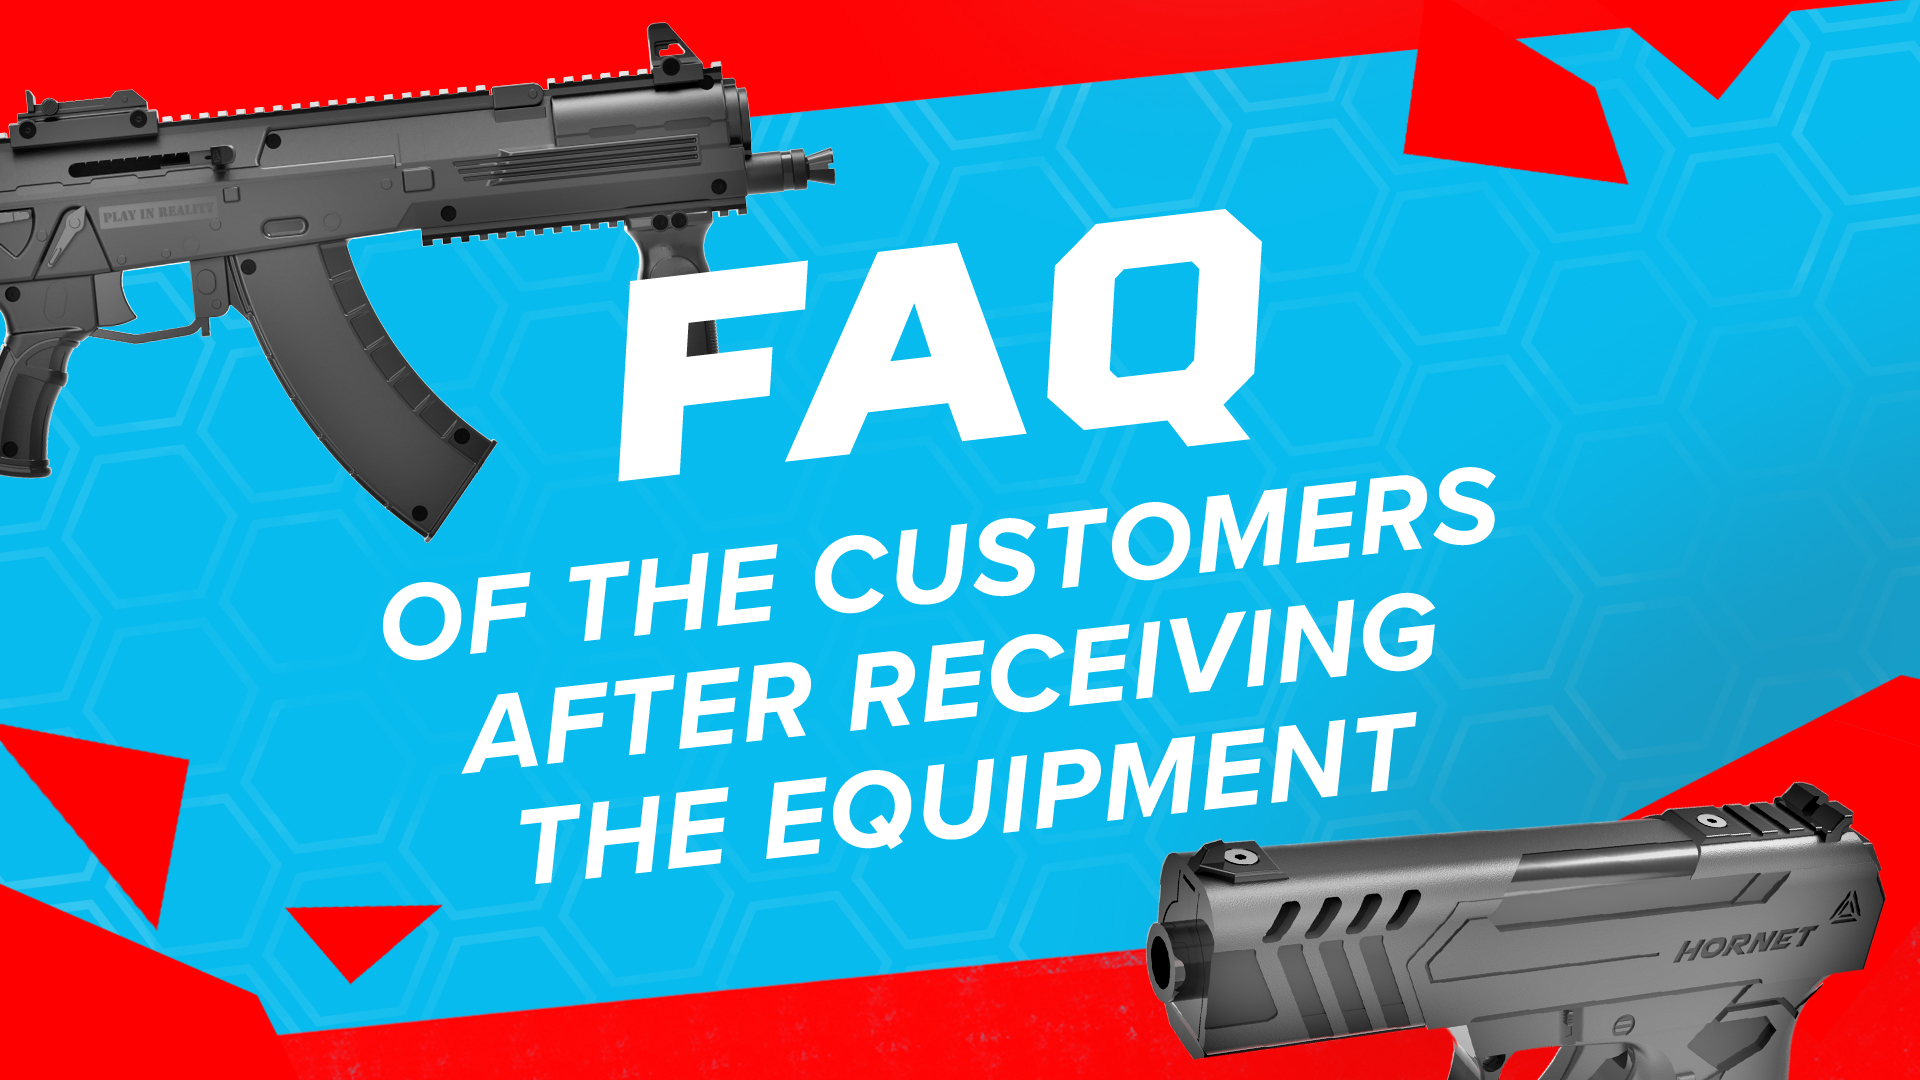 FAQ of the customers after receiving the equipment